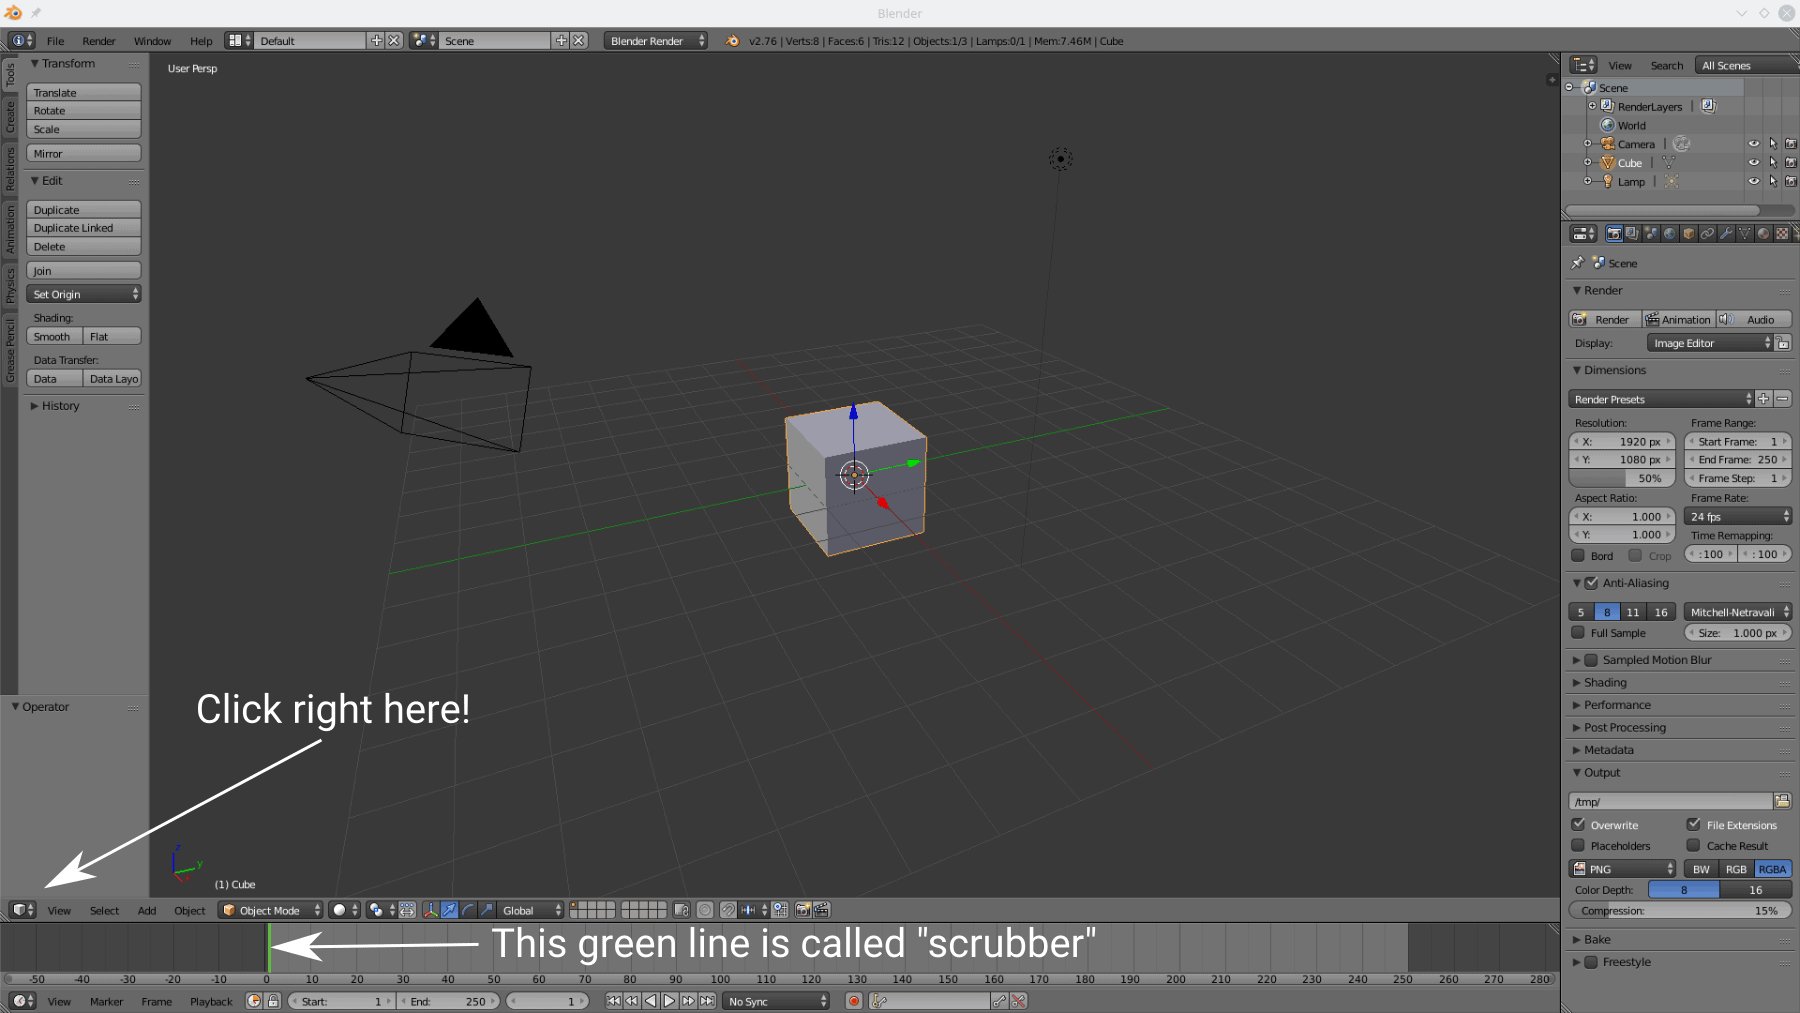 Blender's default startup 3D screen. This what you'll see when you start Blender for the first time.